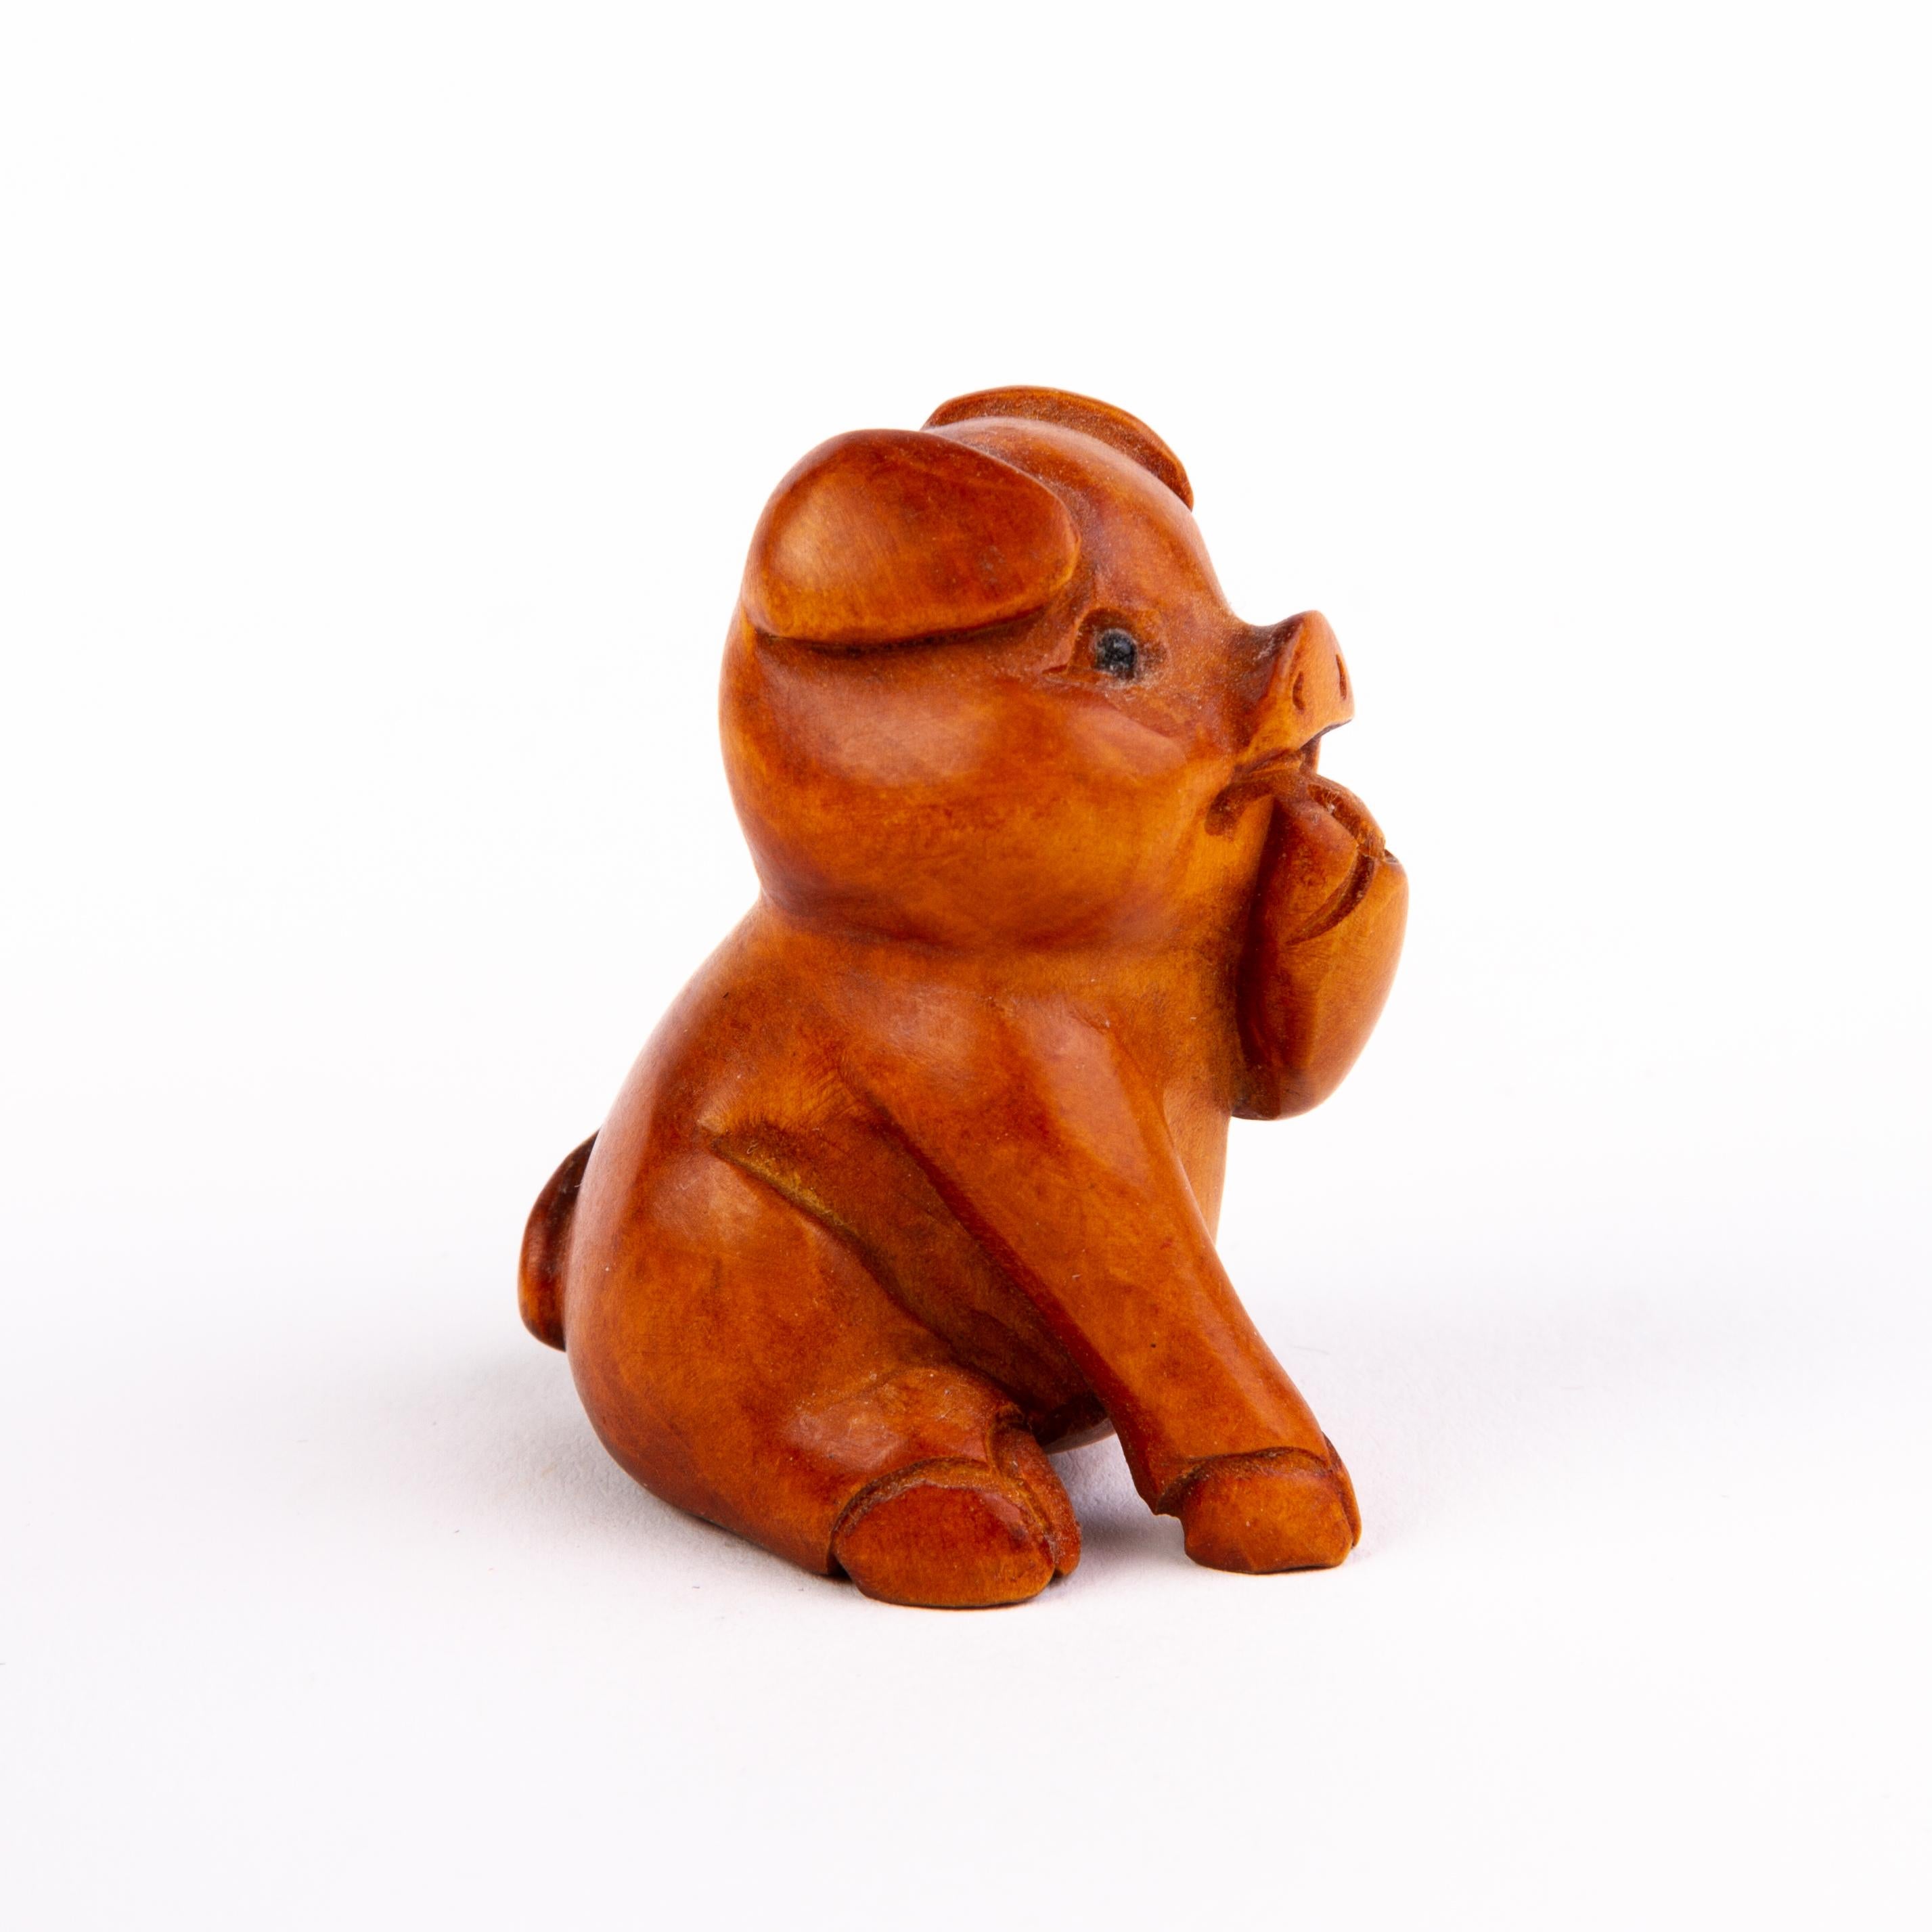 In good condition
From a private collection
Free international shipping
Japanese Boxwood Netsuke Inro of a Pig 